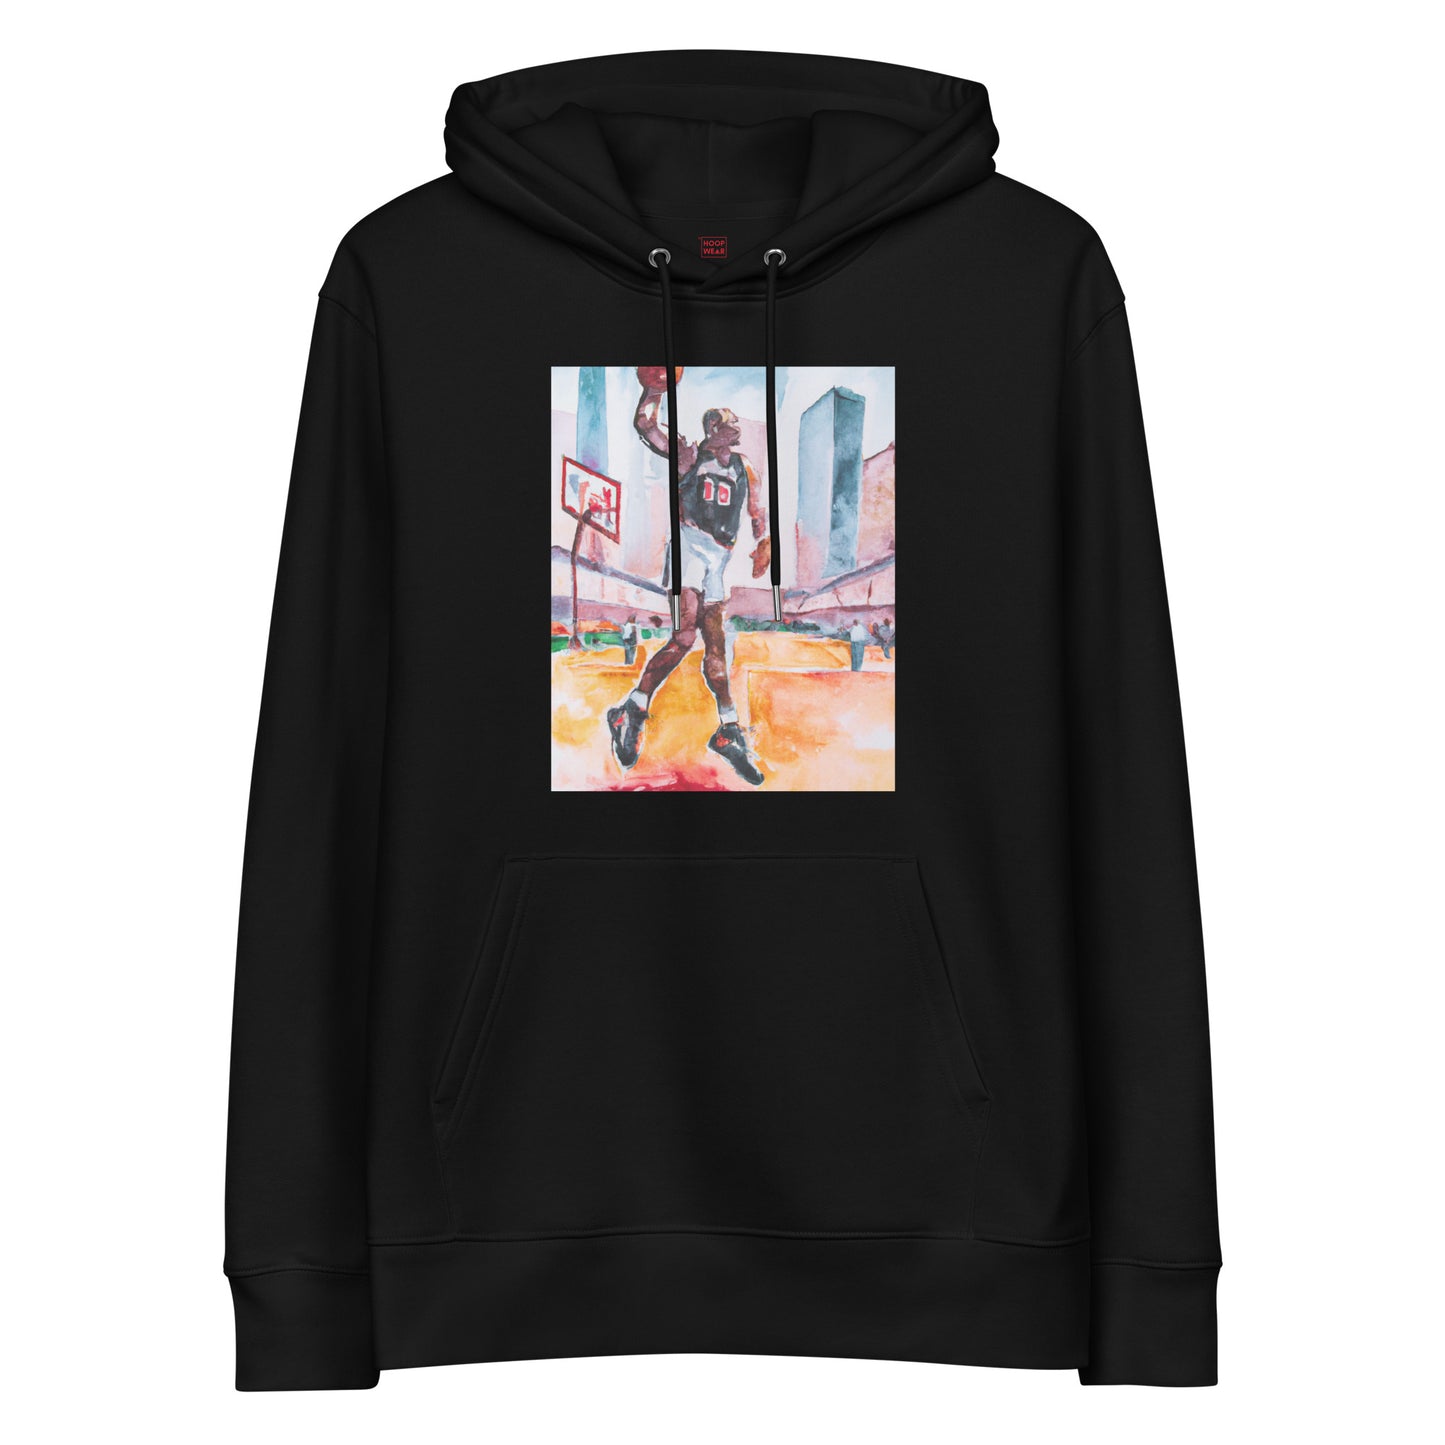 Hoodie "I’m The Girl Your coach Warned You About" - Chicago